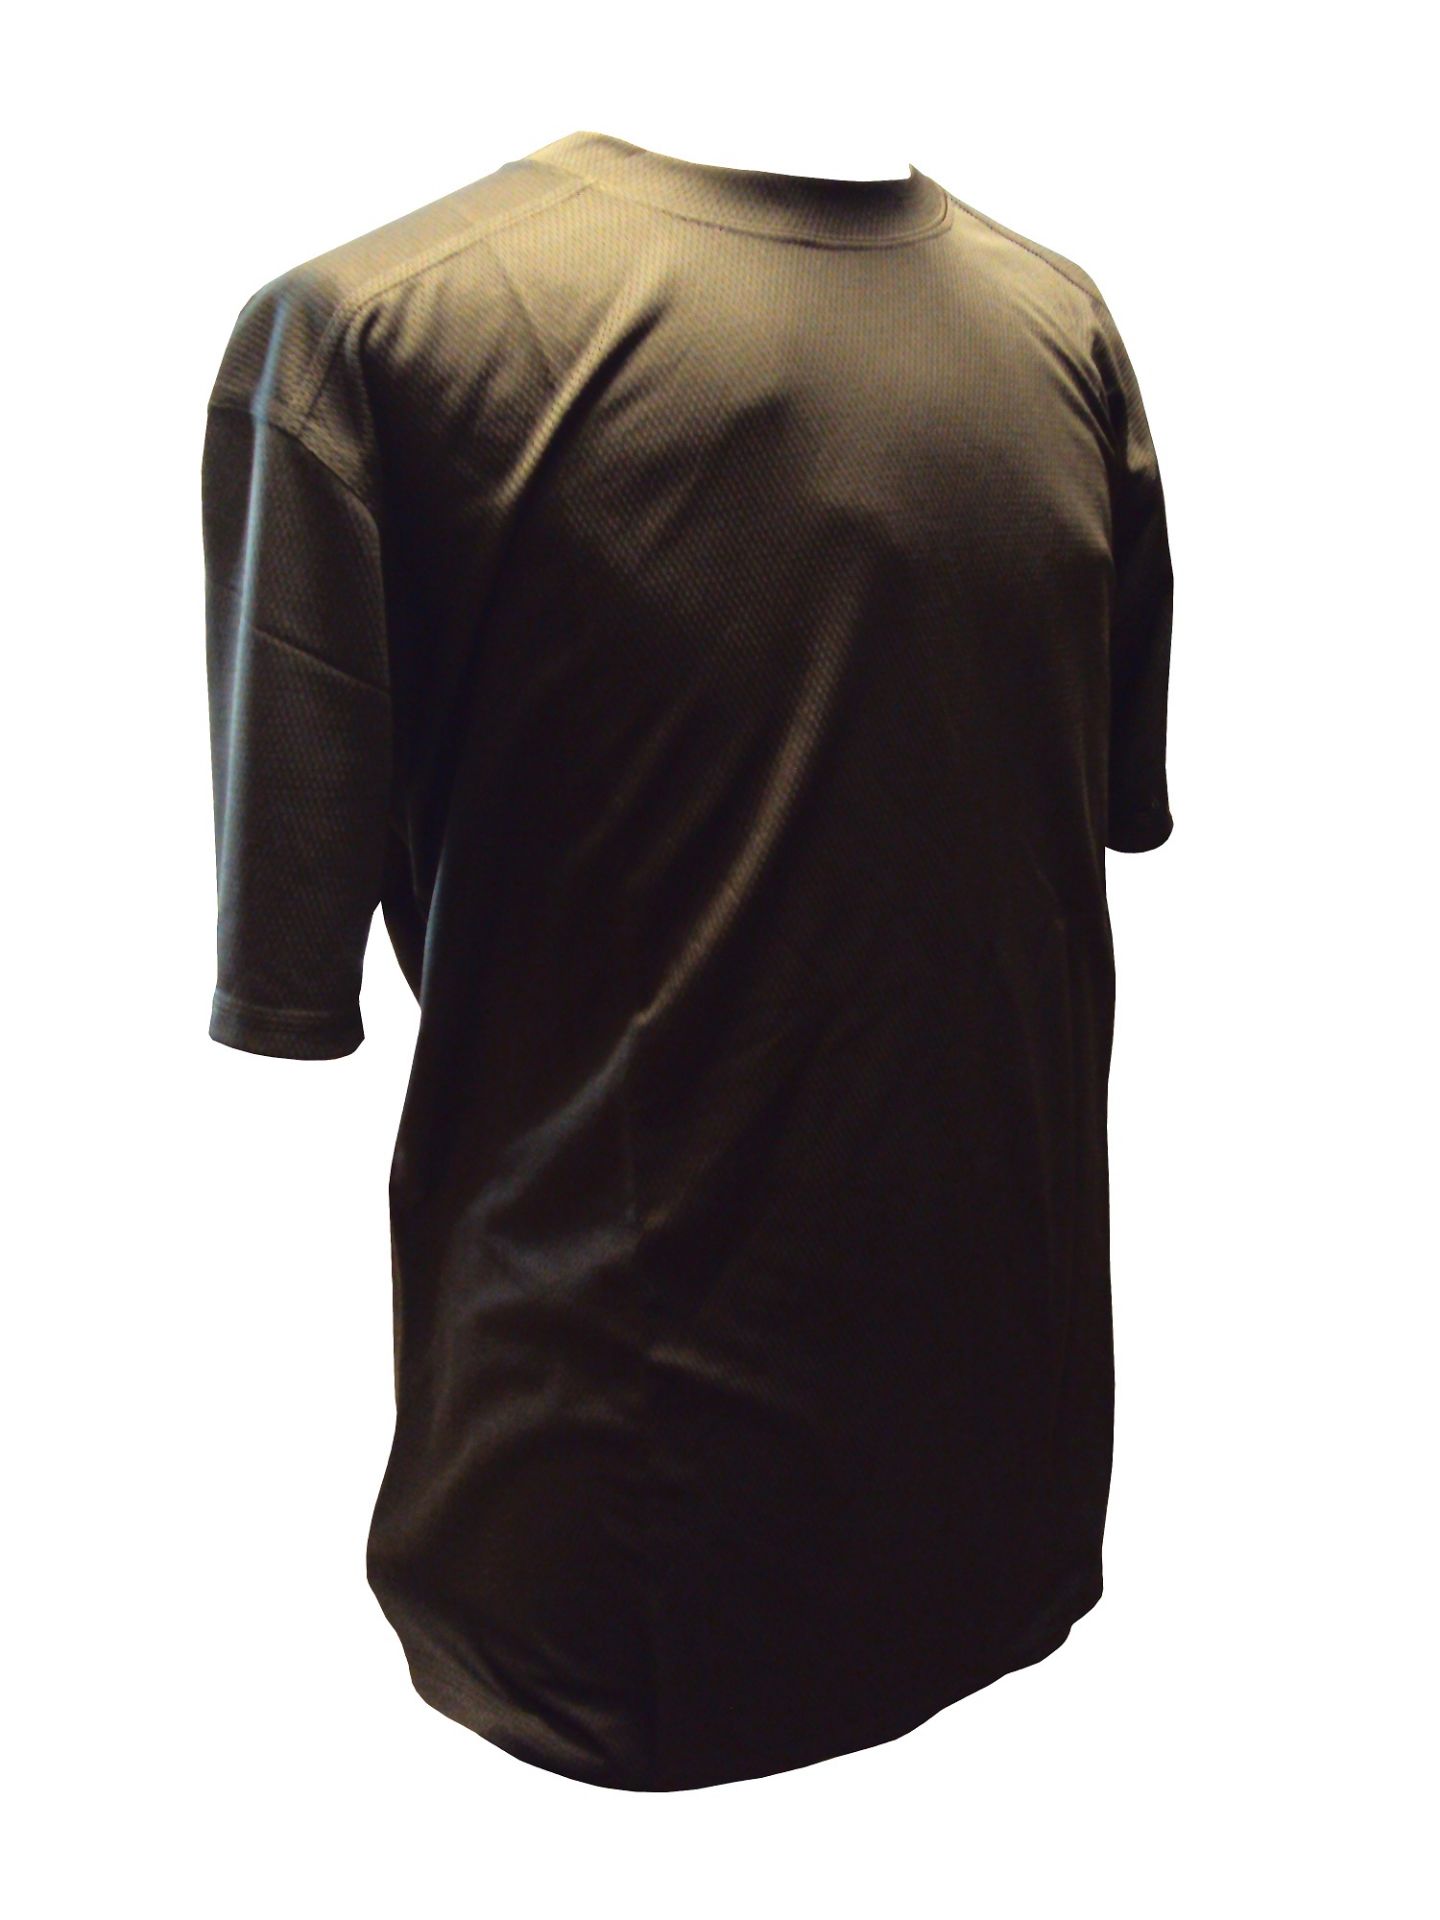 PACK OF 20 - SELF WICKING BROWN SHIRTS - GRADE 1